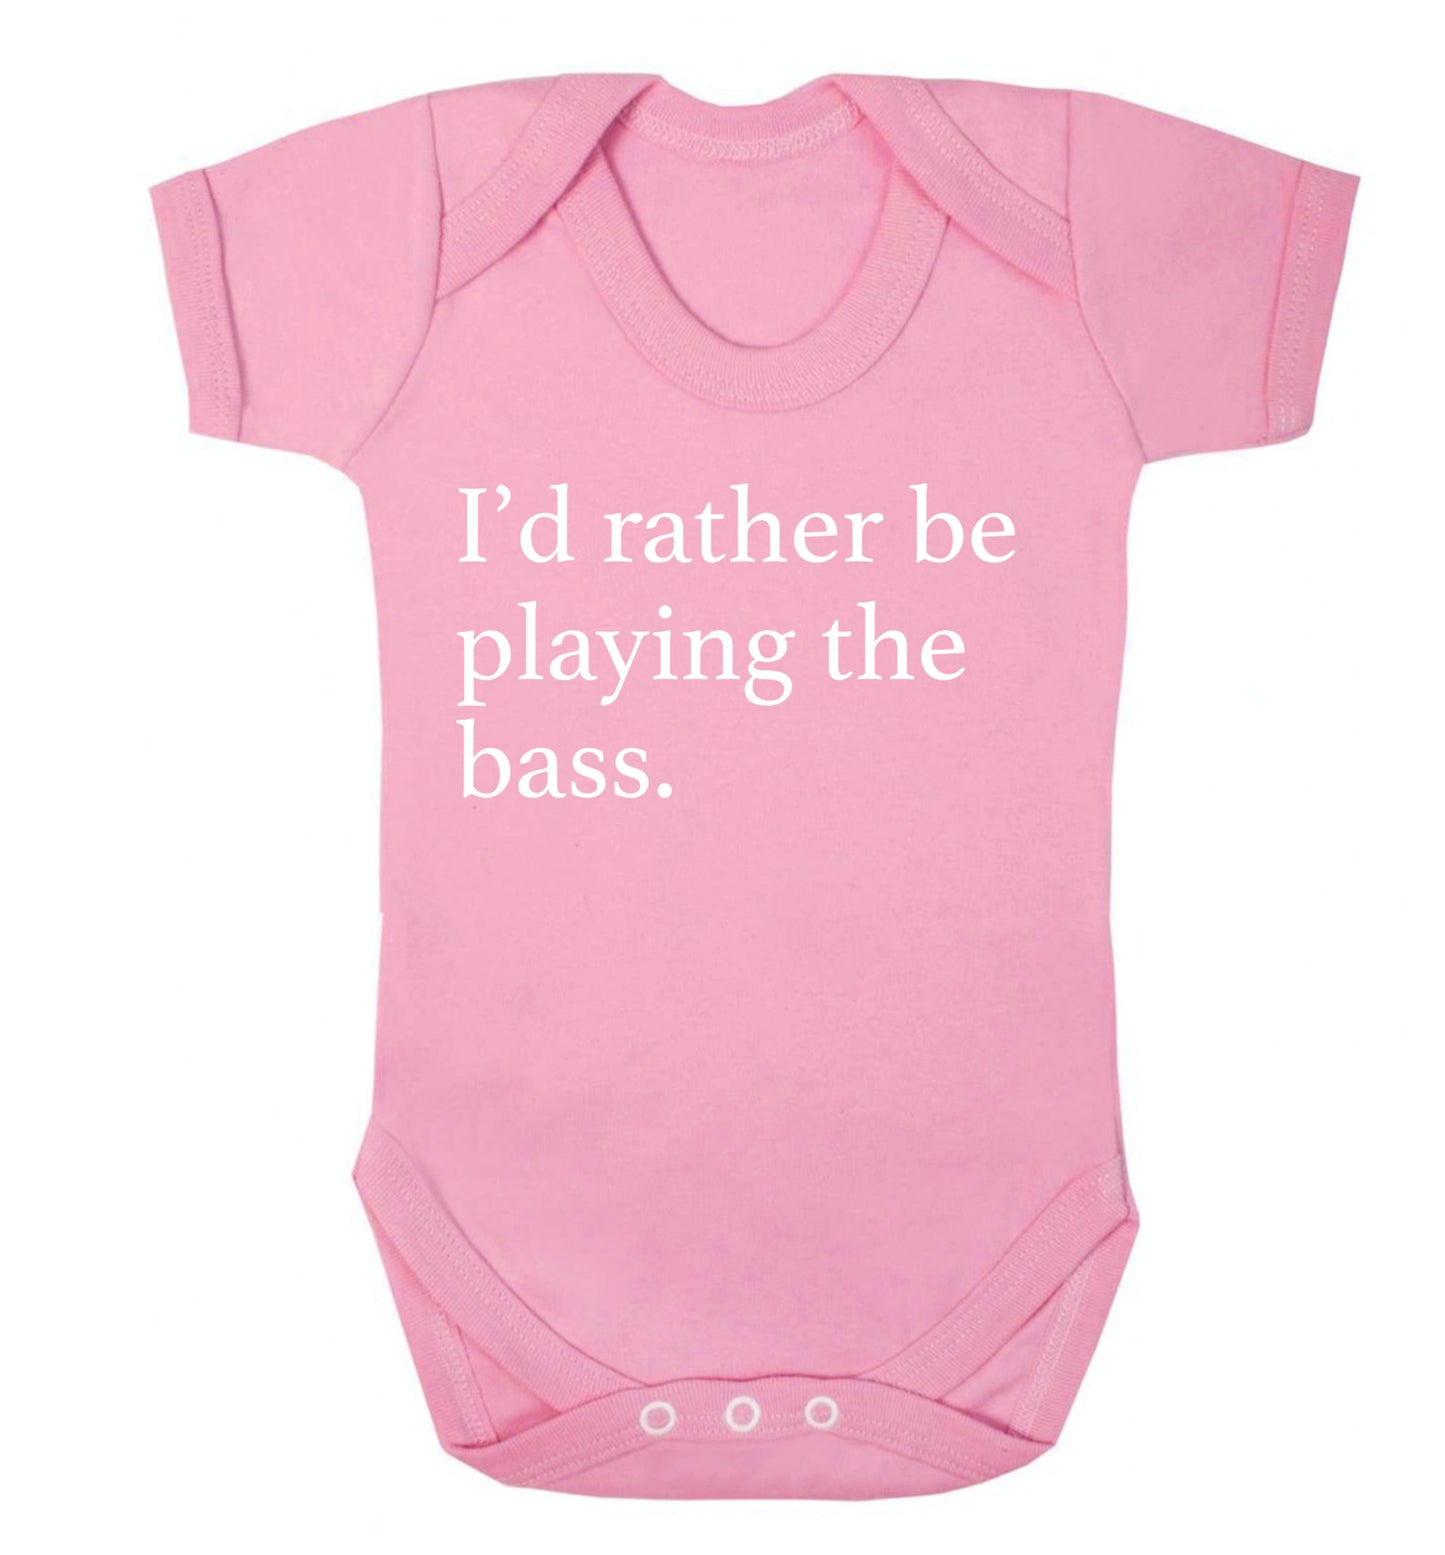 I'd rather by playing the bass Baby Vest pale pink 18-24 months